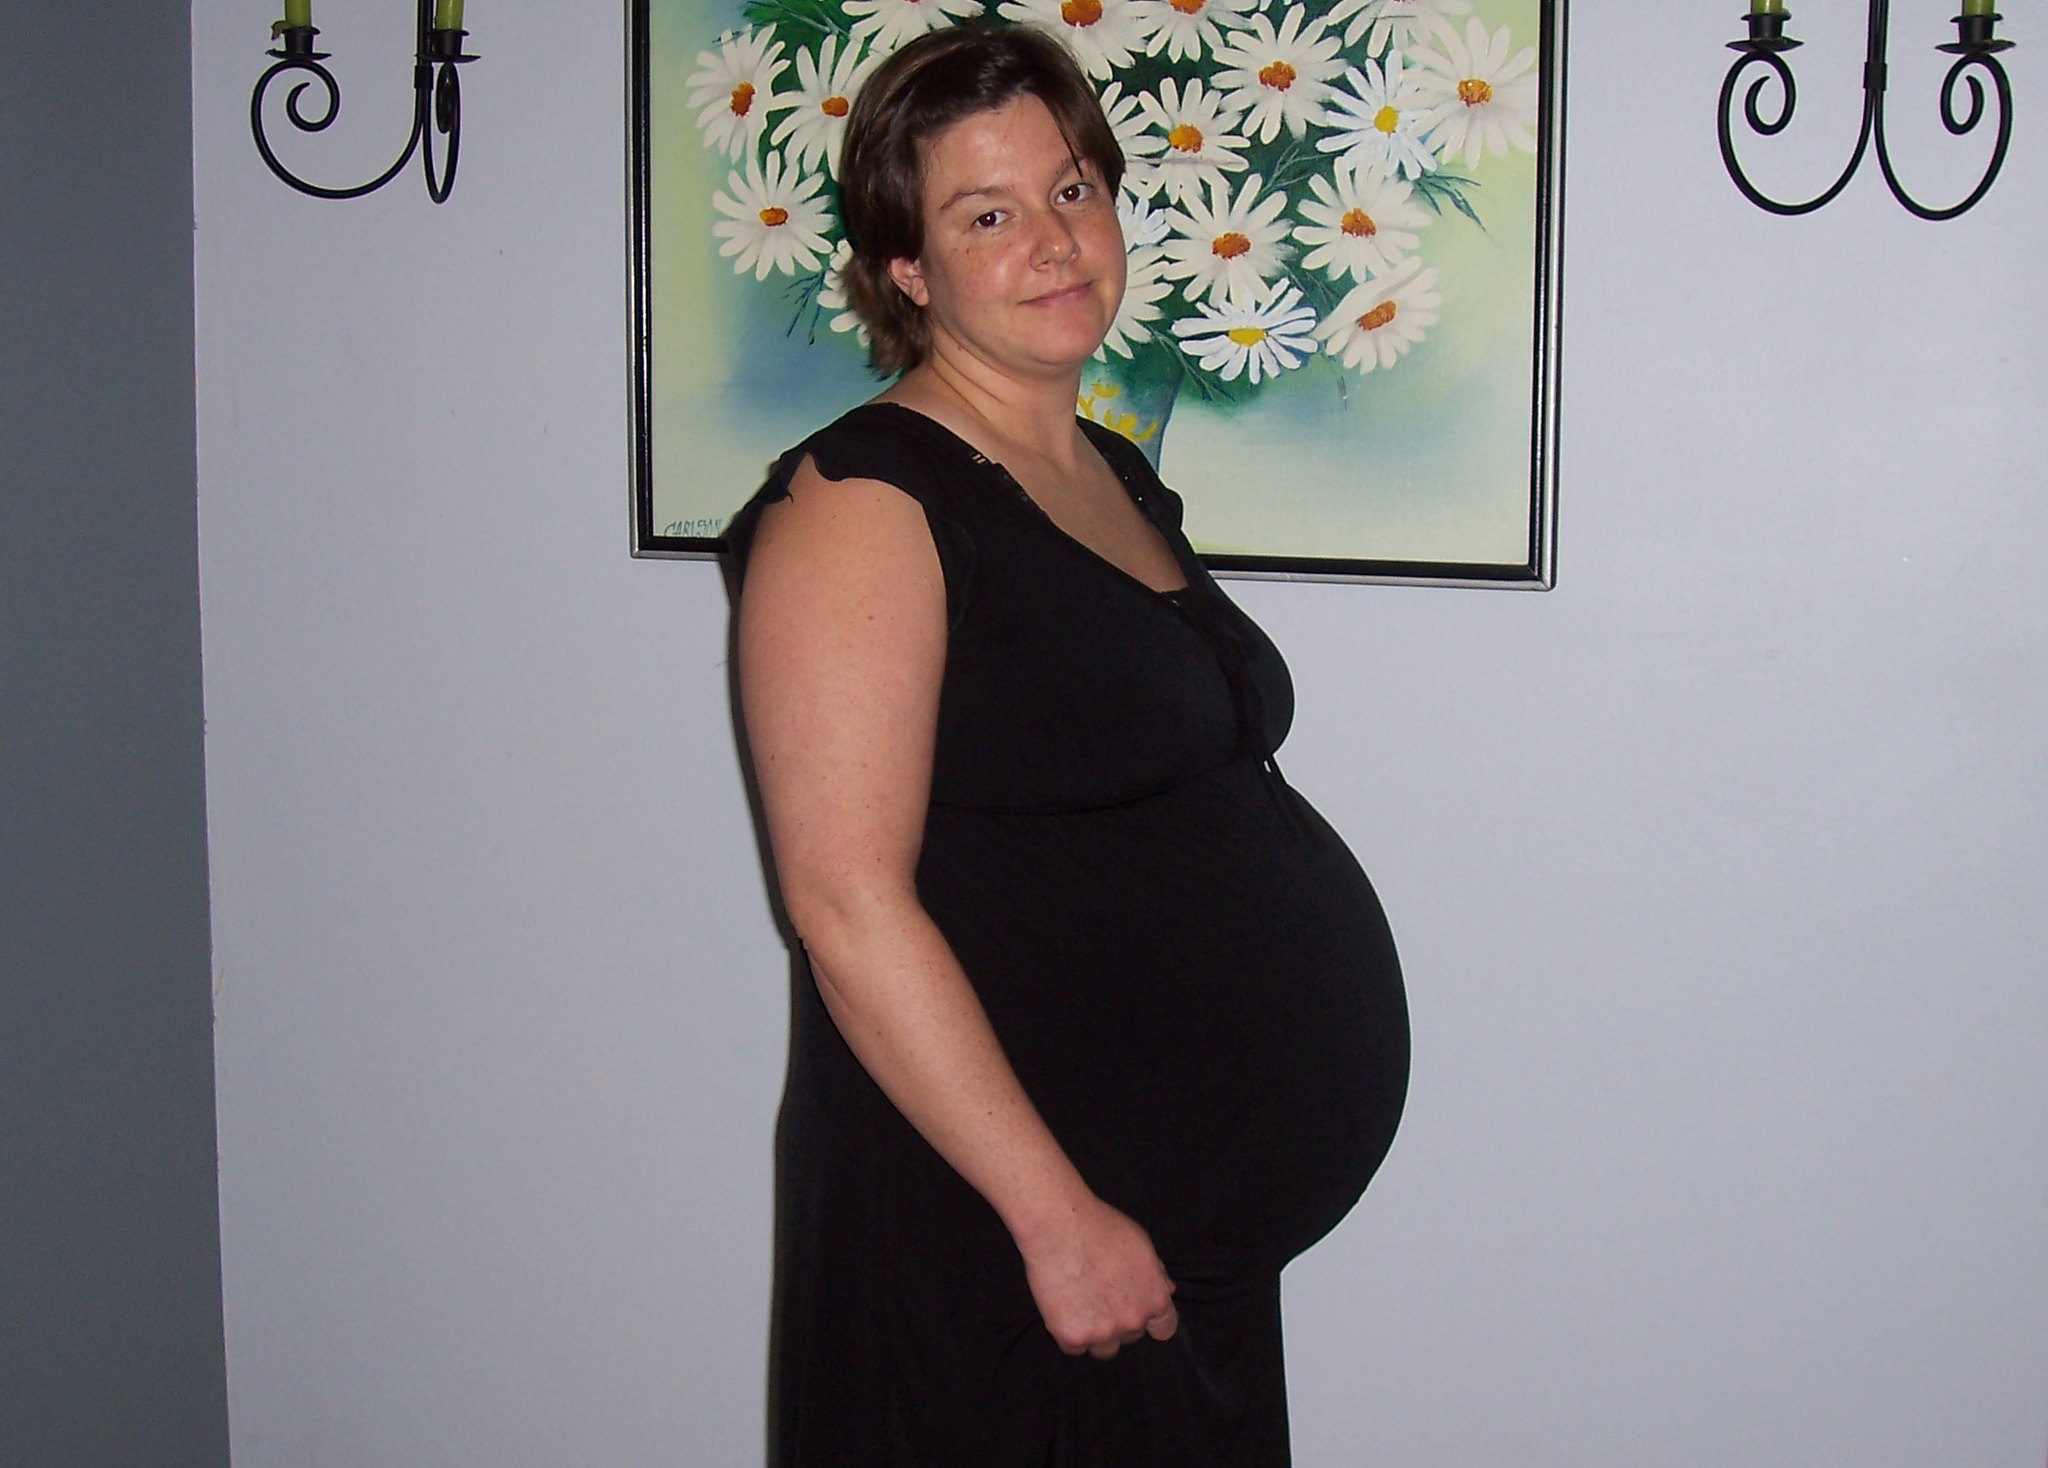 A pregnant woman | Source: Flickr